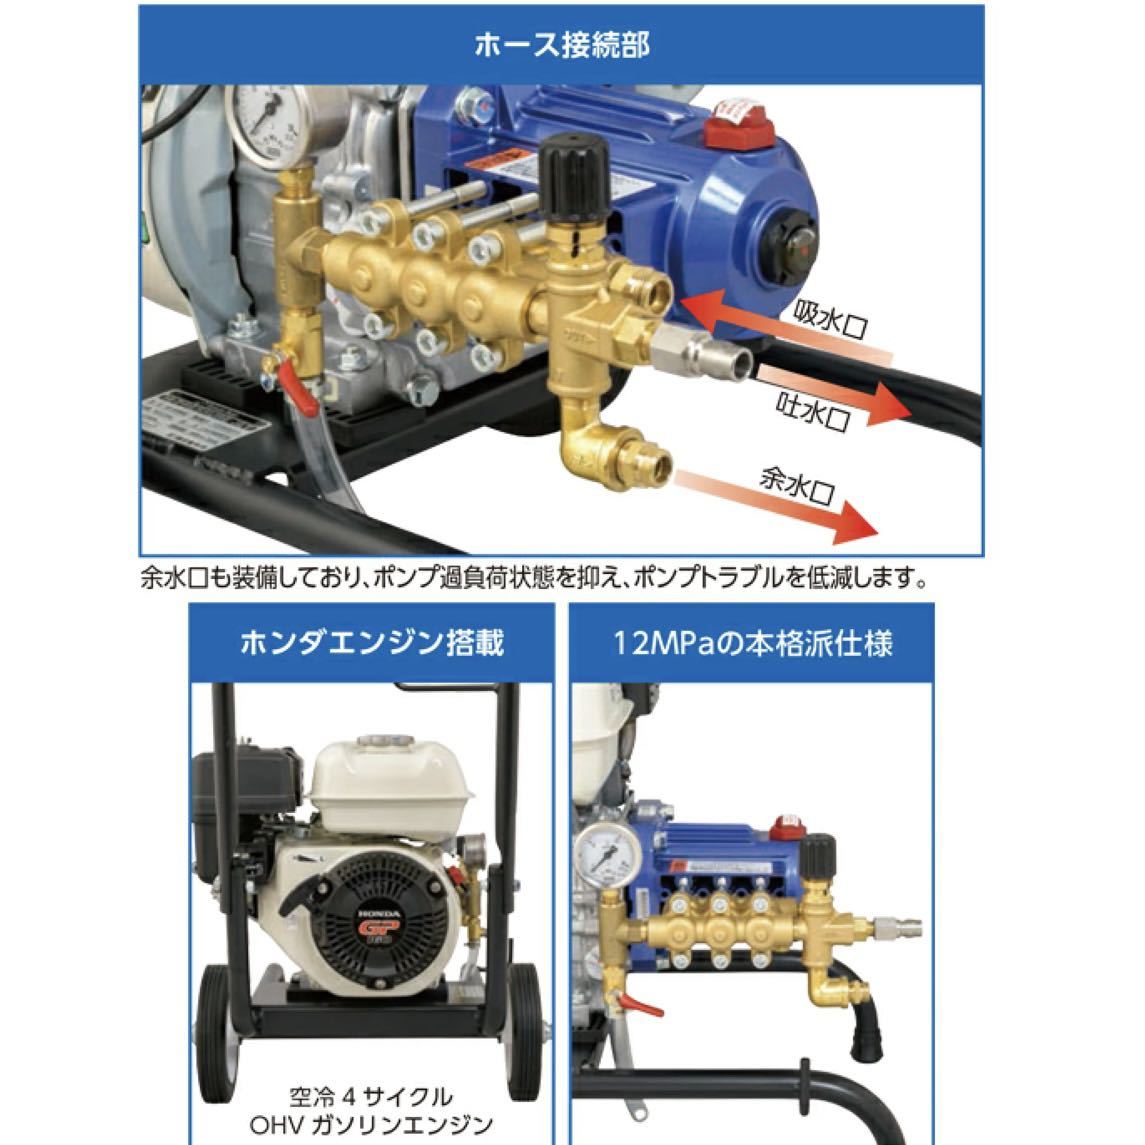 0 new goods / regular goods #2022 year buy 26.5 ten thousand Tsurumi pump engine high pressure washer HPJ-4120ME2 small size light weight classical specification pressure 12MPa.. amount 10L Hyogo prefecture Himeji city departure 